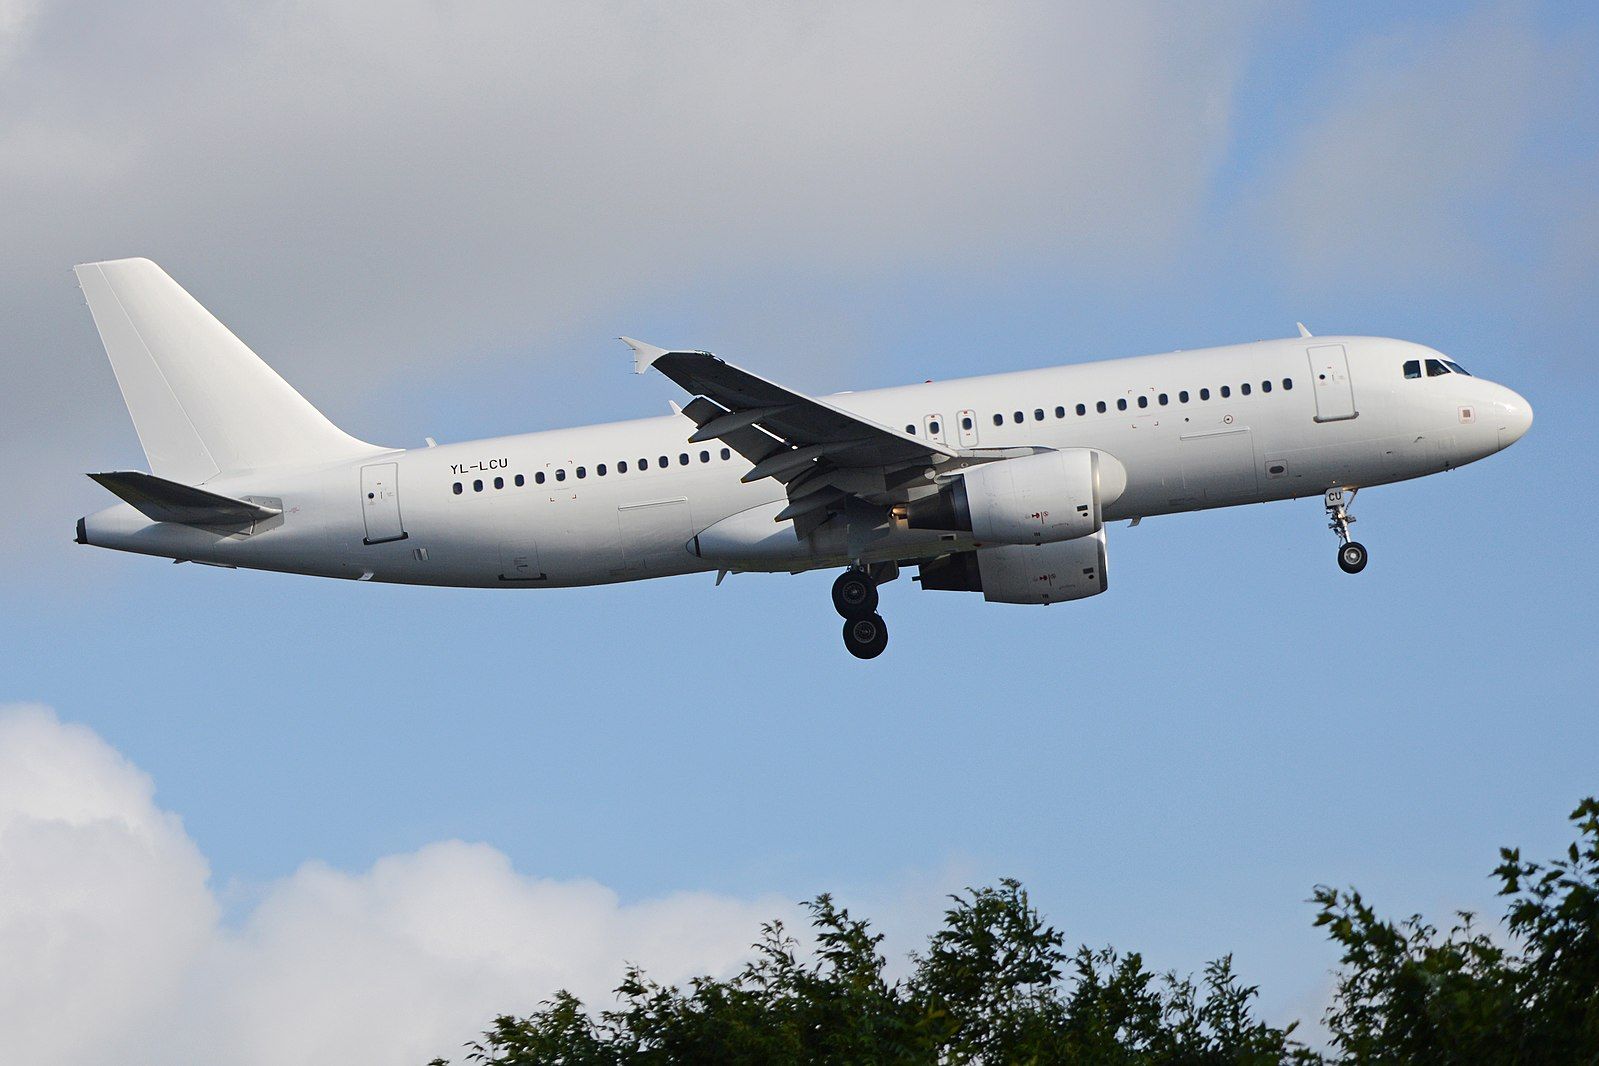 1599px-Airbus_A320-214_‘YL-LCU’_(41493409685)